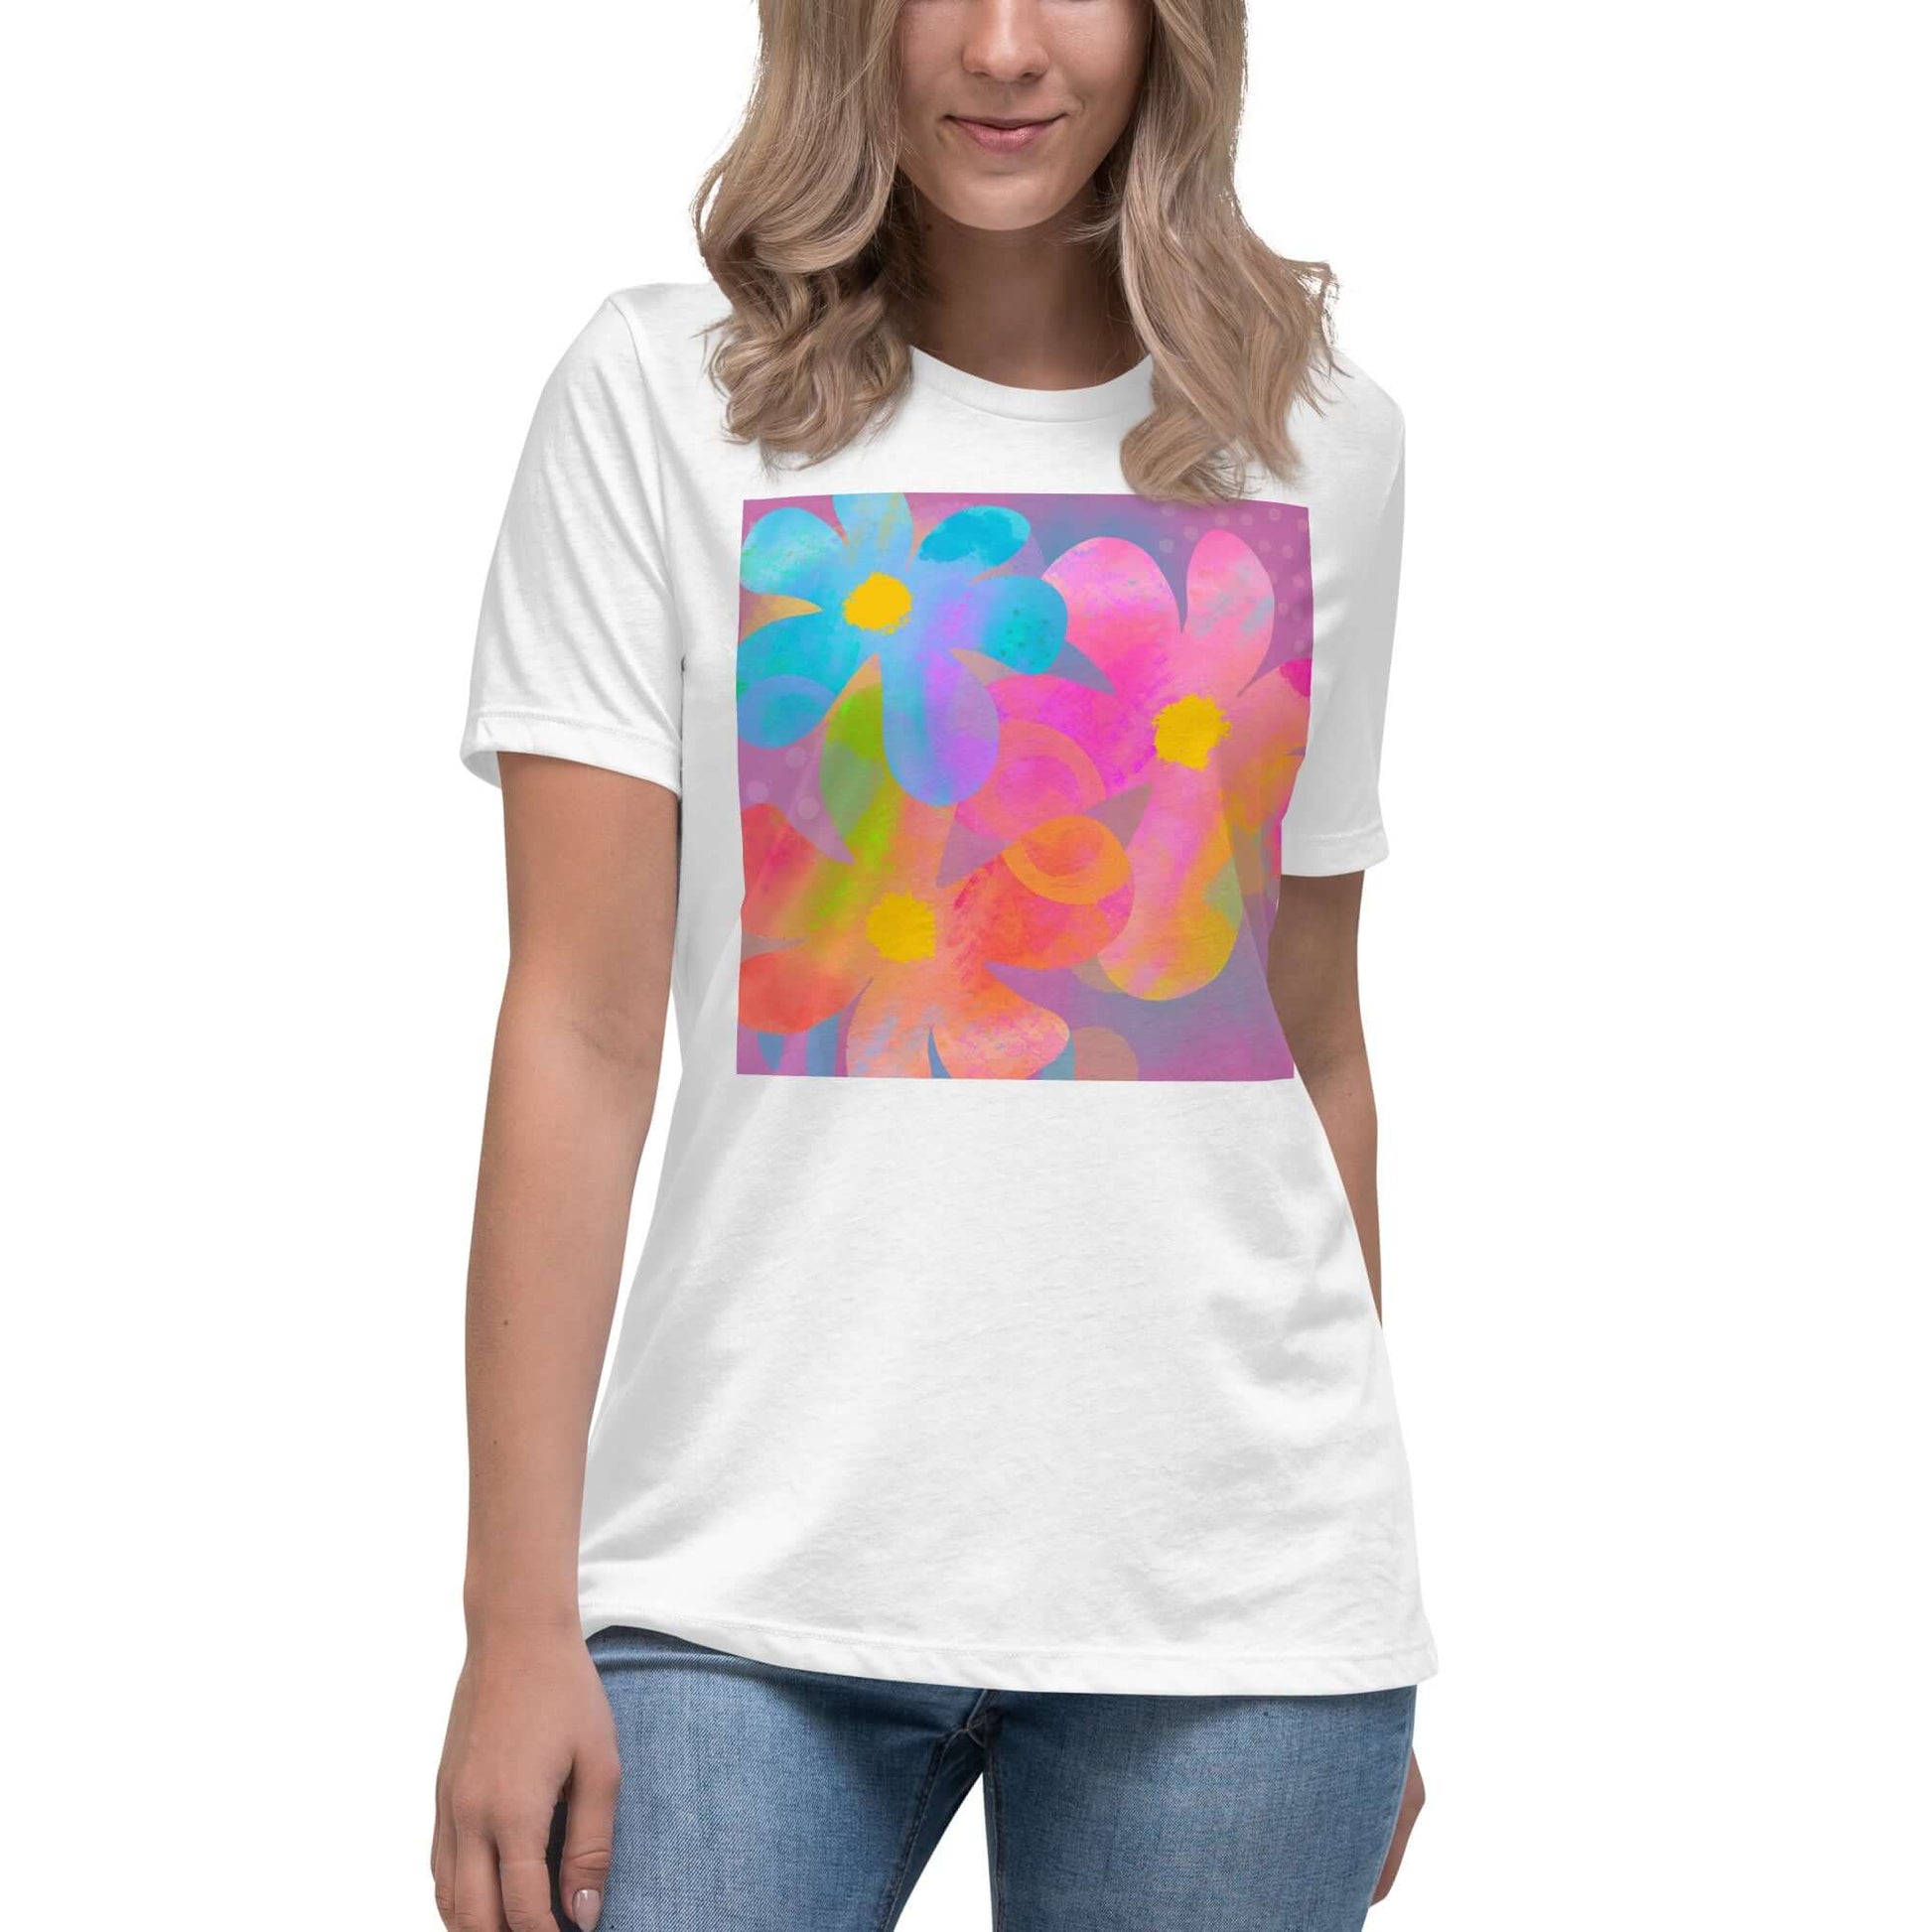 Big Colorful 1960s Psychedelic “Hippie Flowers” Women’s Short Sleeve Tee in White